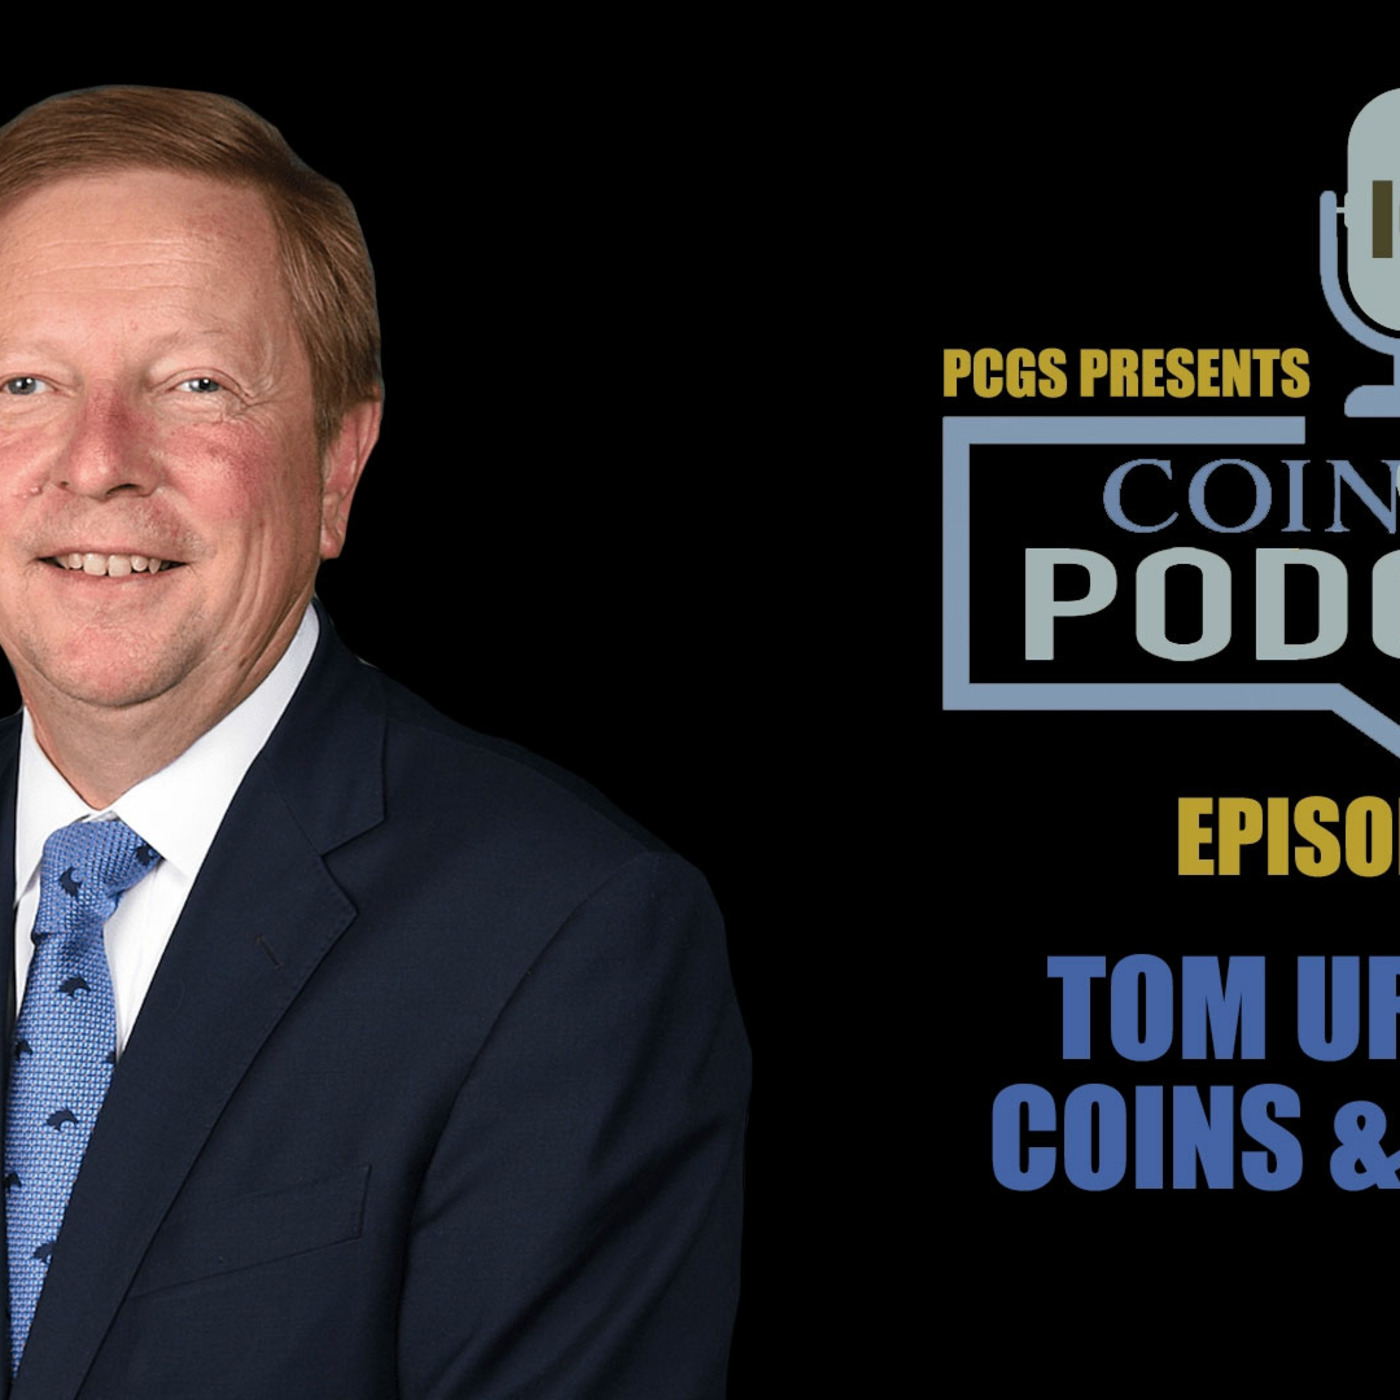 Episode 177: CoinWeek Podcast #177: Tom Uram on Coins & Clubs